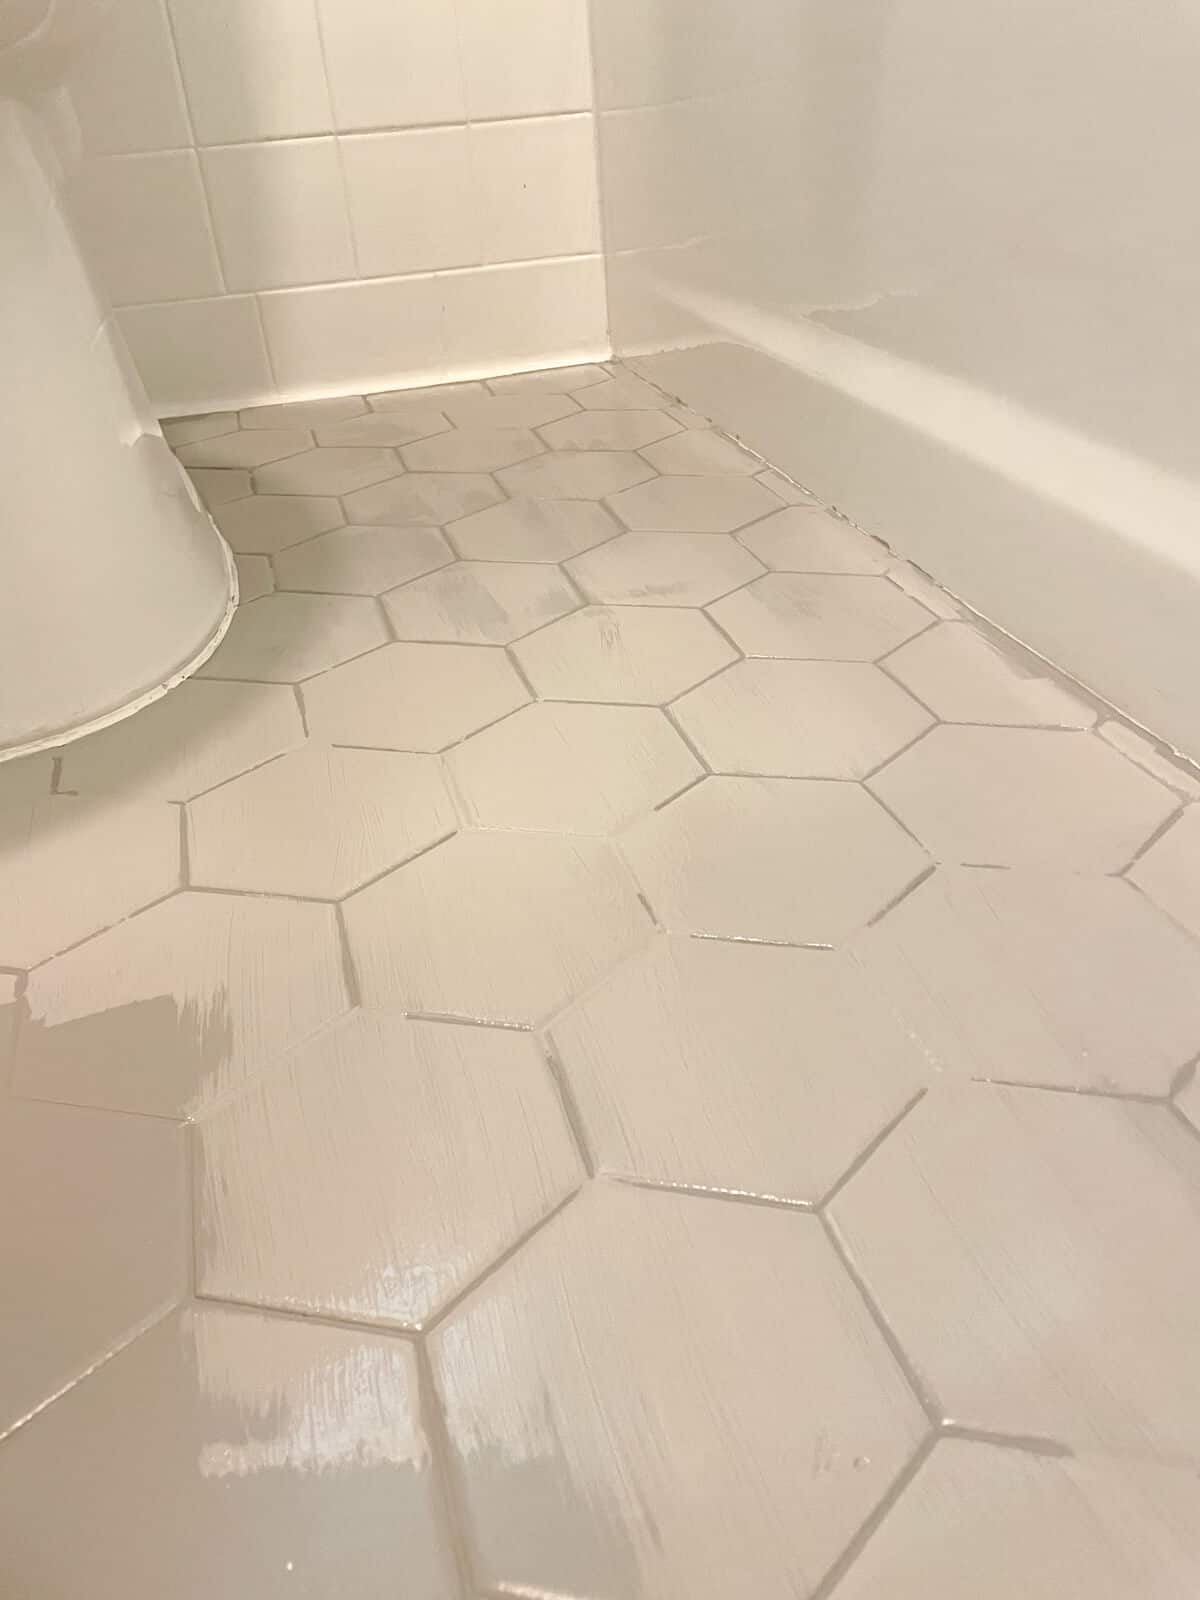 painted tile floor touched up